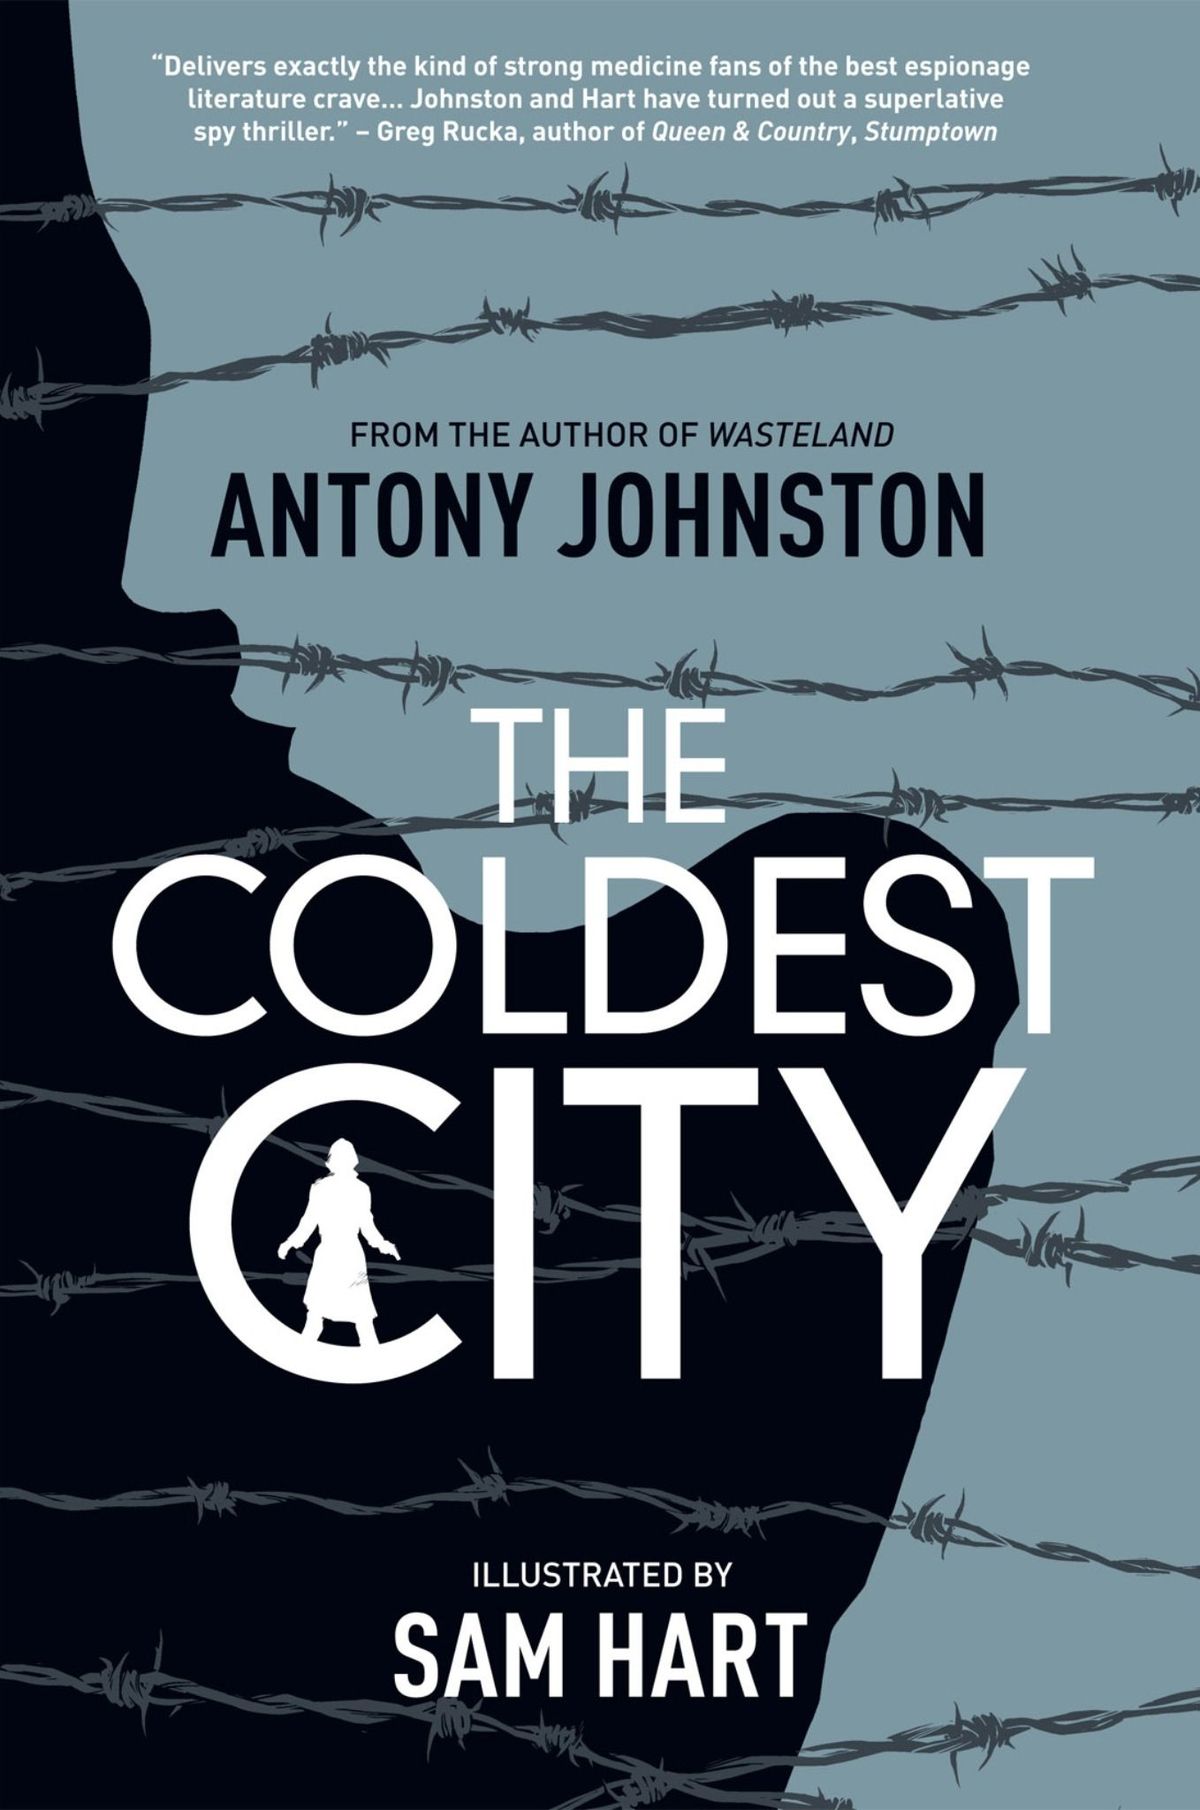 Theron To Star In Film Adaptation Of Oni's 'The Coldest City'